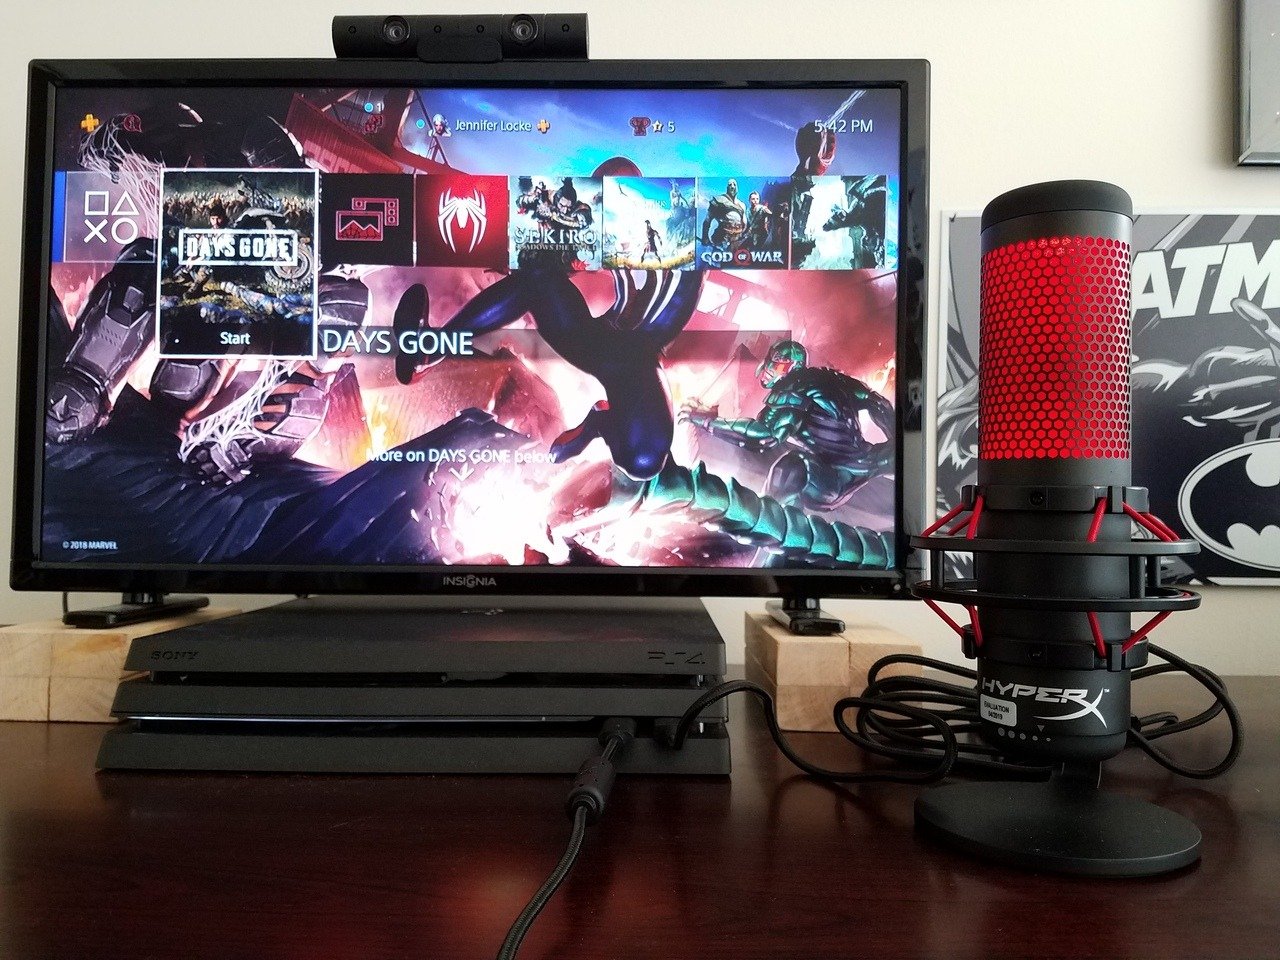 Android Cocom Hyperx Has Made An Outstanding Microphone With The